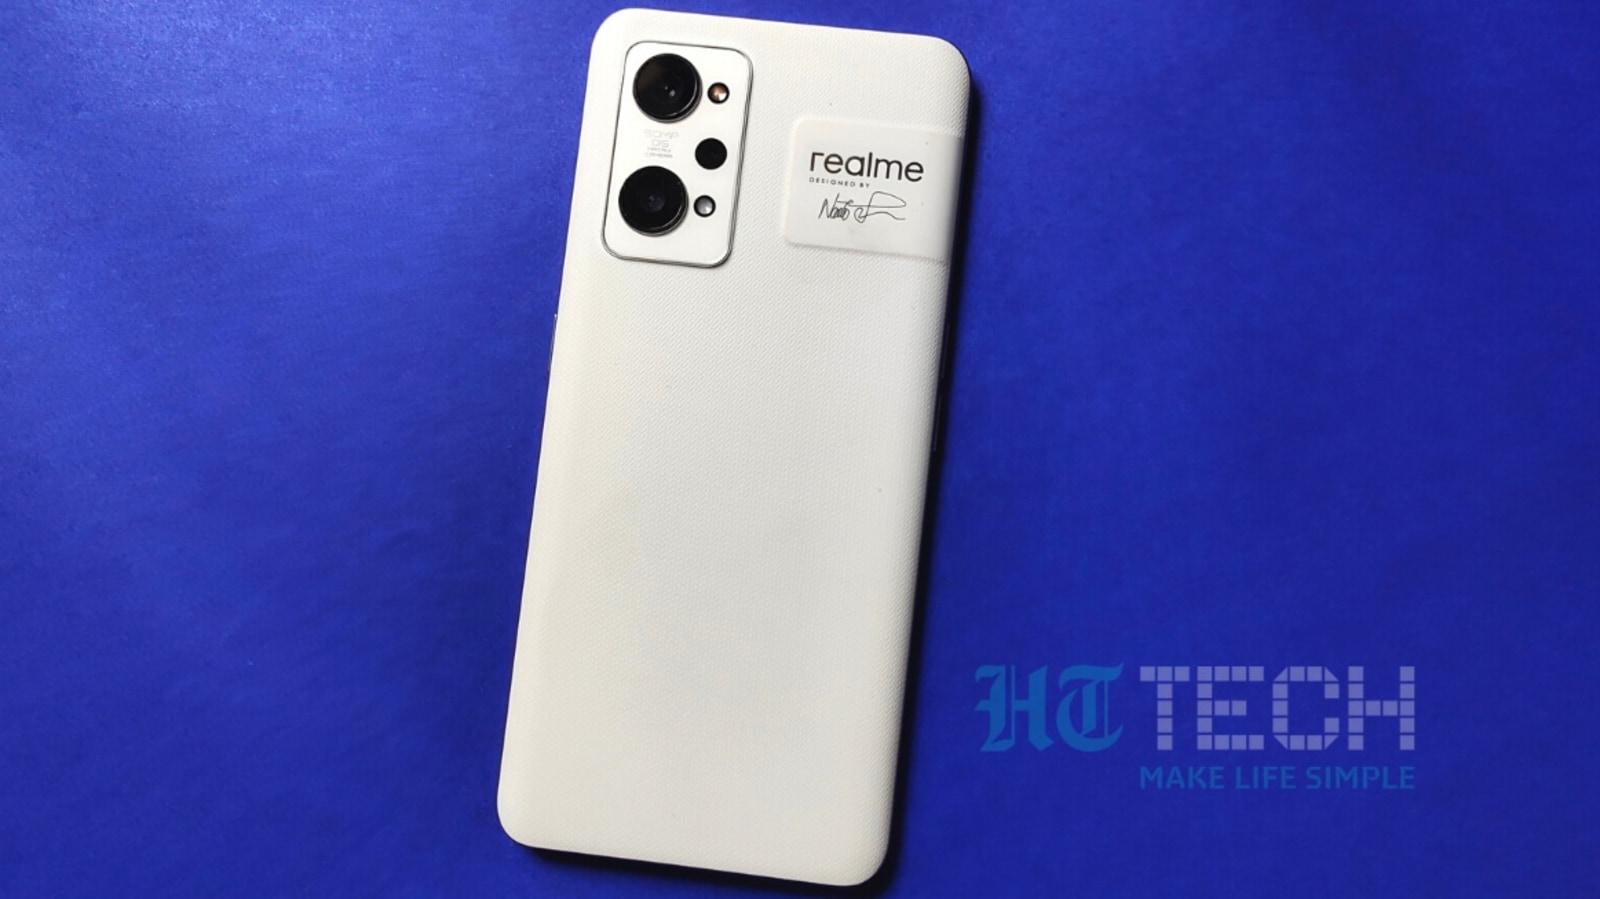 Realme GT2 with Snapdragon 888, 50MP triple camera launched in India -  Specs, pricing & availability - Gizmochina